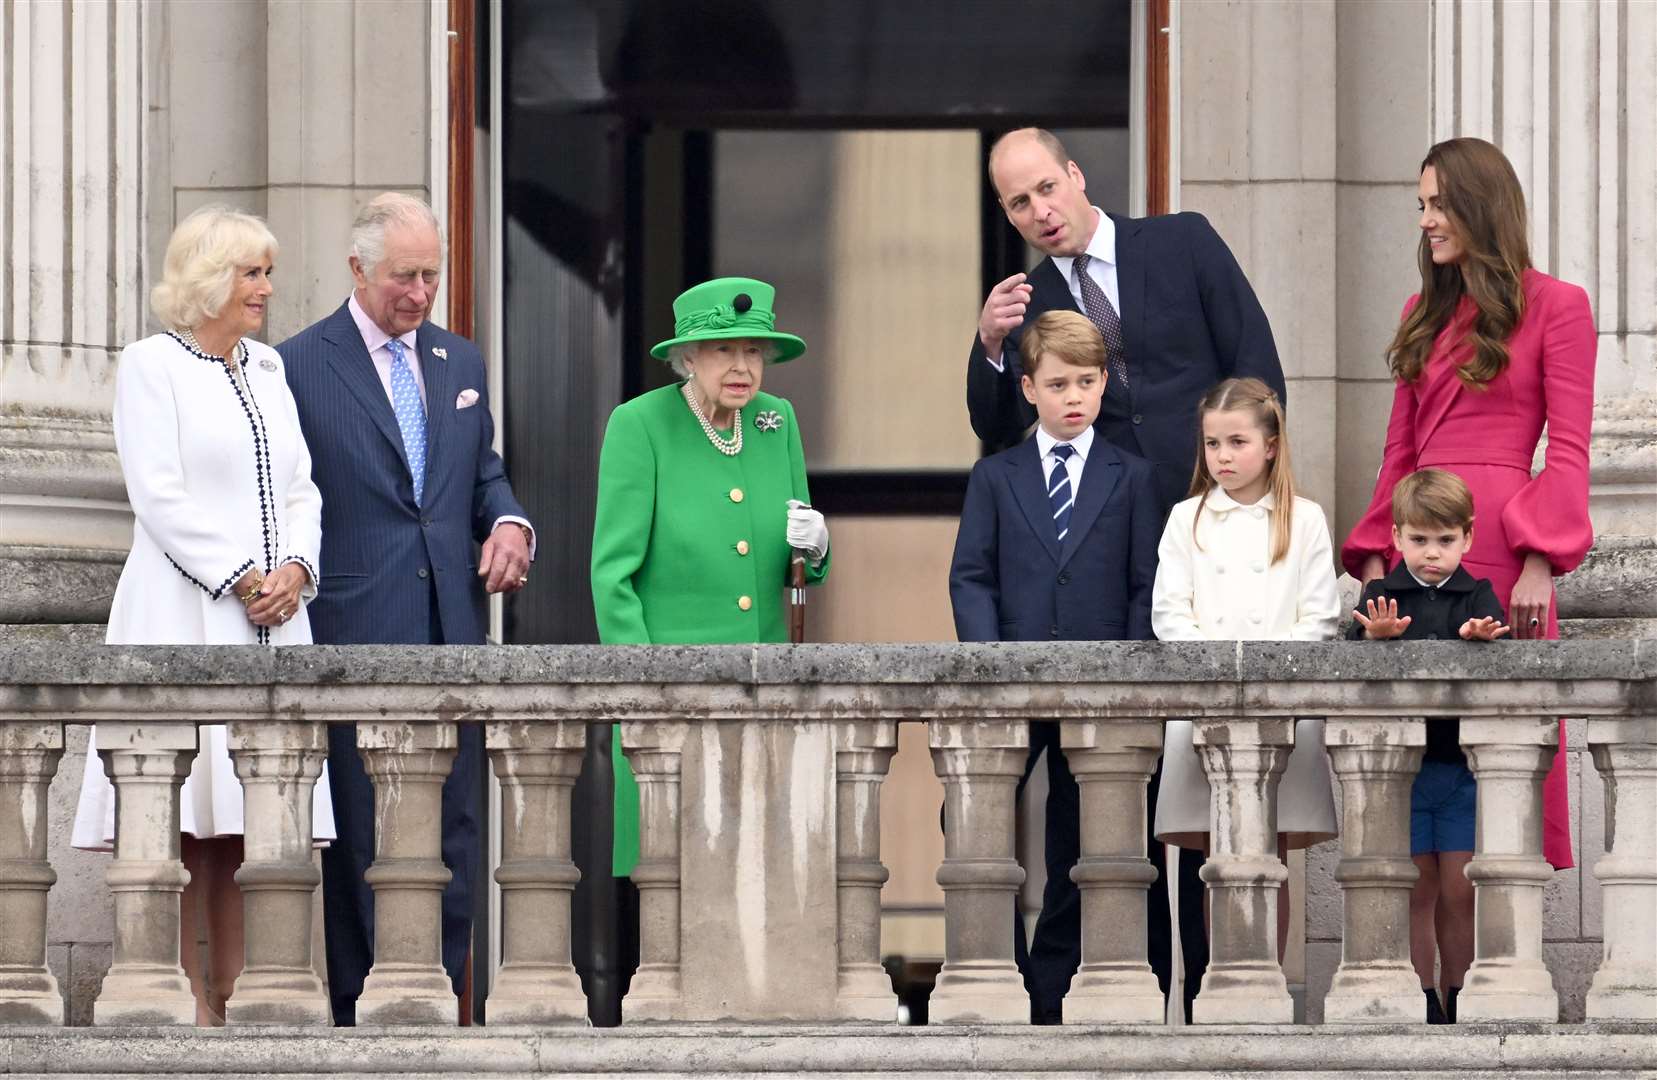 The Duchess of Cornwall, the Prince of Wales, the Queen, Prince George, the Duke of Cambridge, Princess Charlotte, Prince Louis, and the Duchess of Cambridge appear on the balcony of Buckingham Palace during the Platinum Jubilee celebrations (Leon Neal/PA)